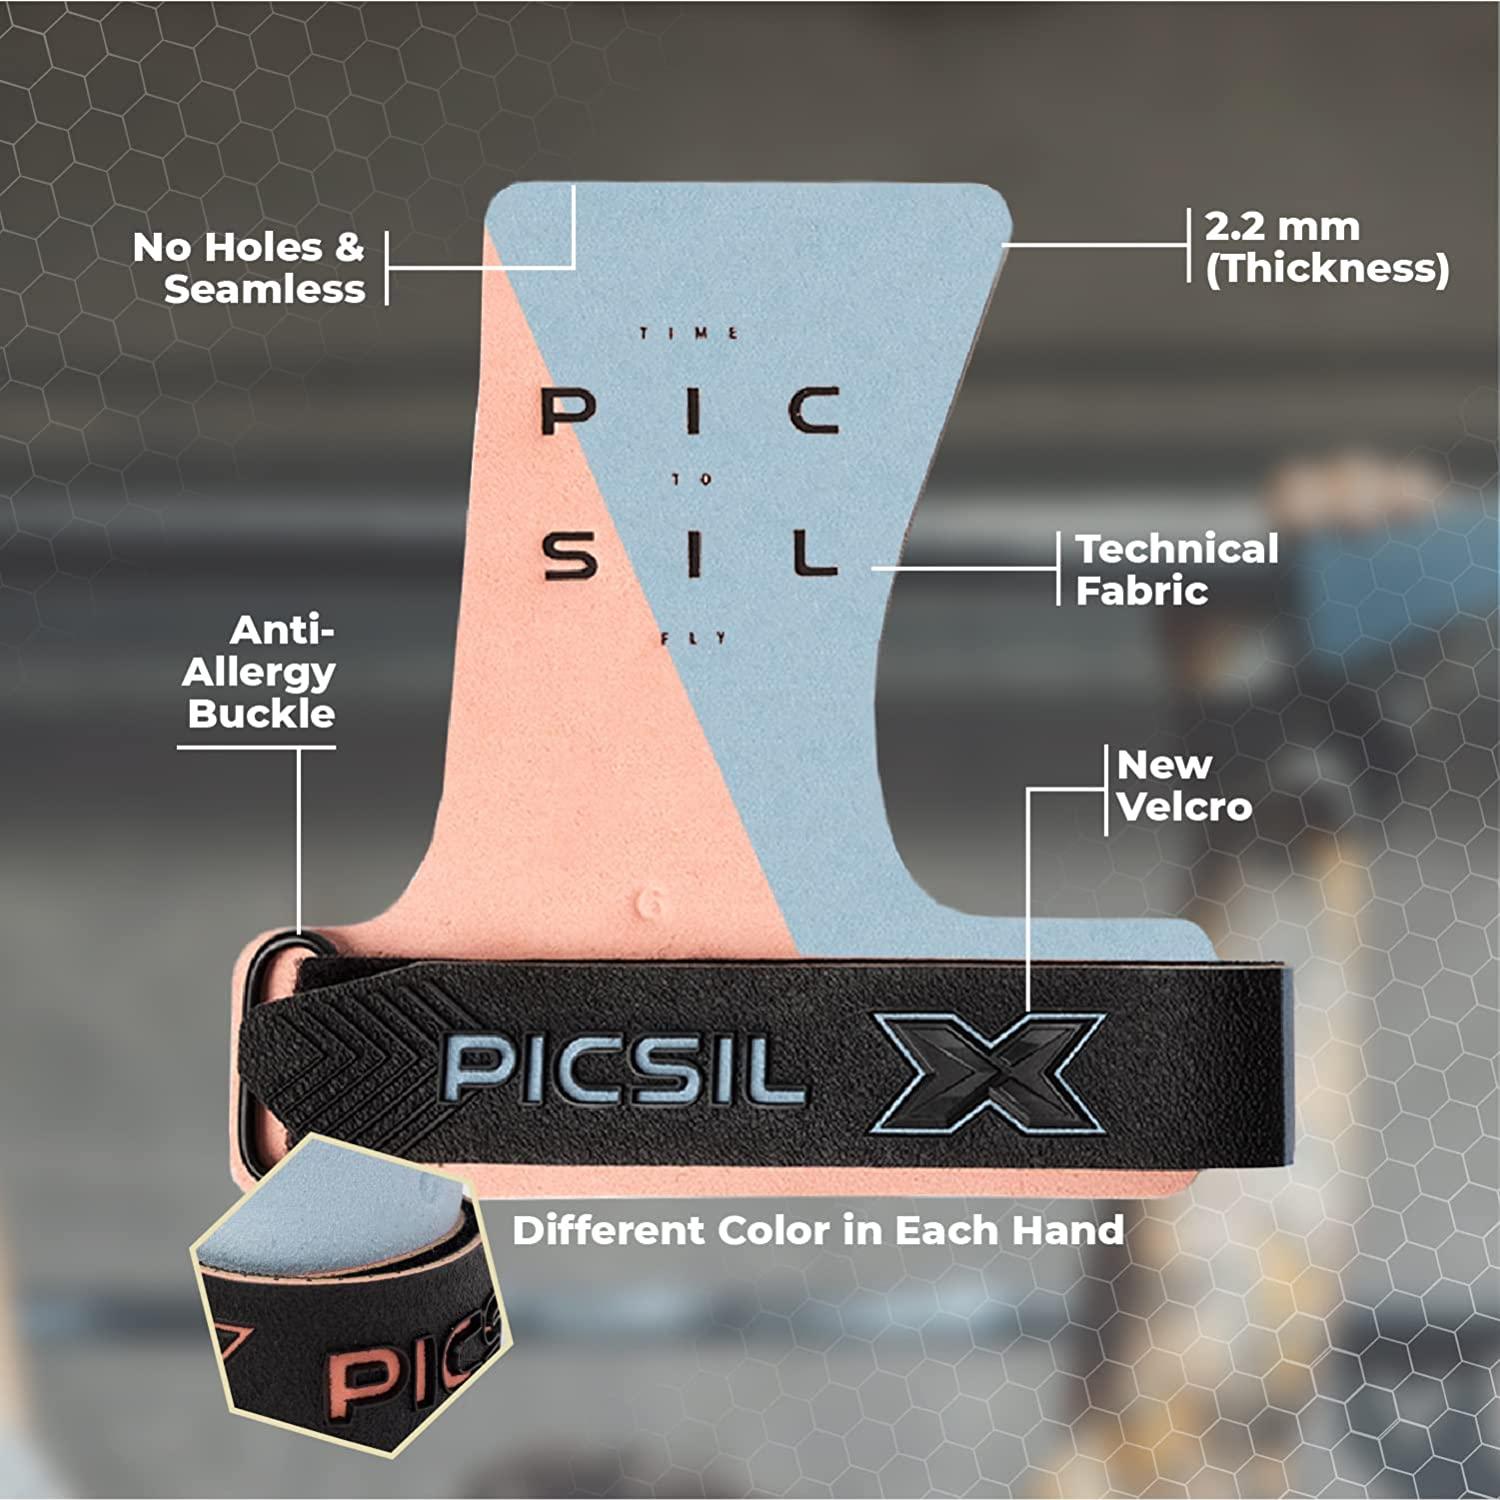 PICSIL Condor Grips, No Hole Leather Hand Grips , Increased Protection and  Comfort, Hand Grips for Gymnastic, Cross Training, Pull ups, Weightlifting,  Prevents Blisters and Tears G (S-M) Coral